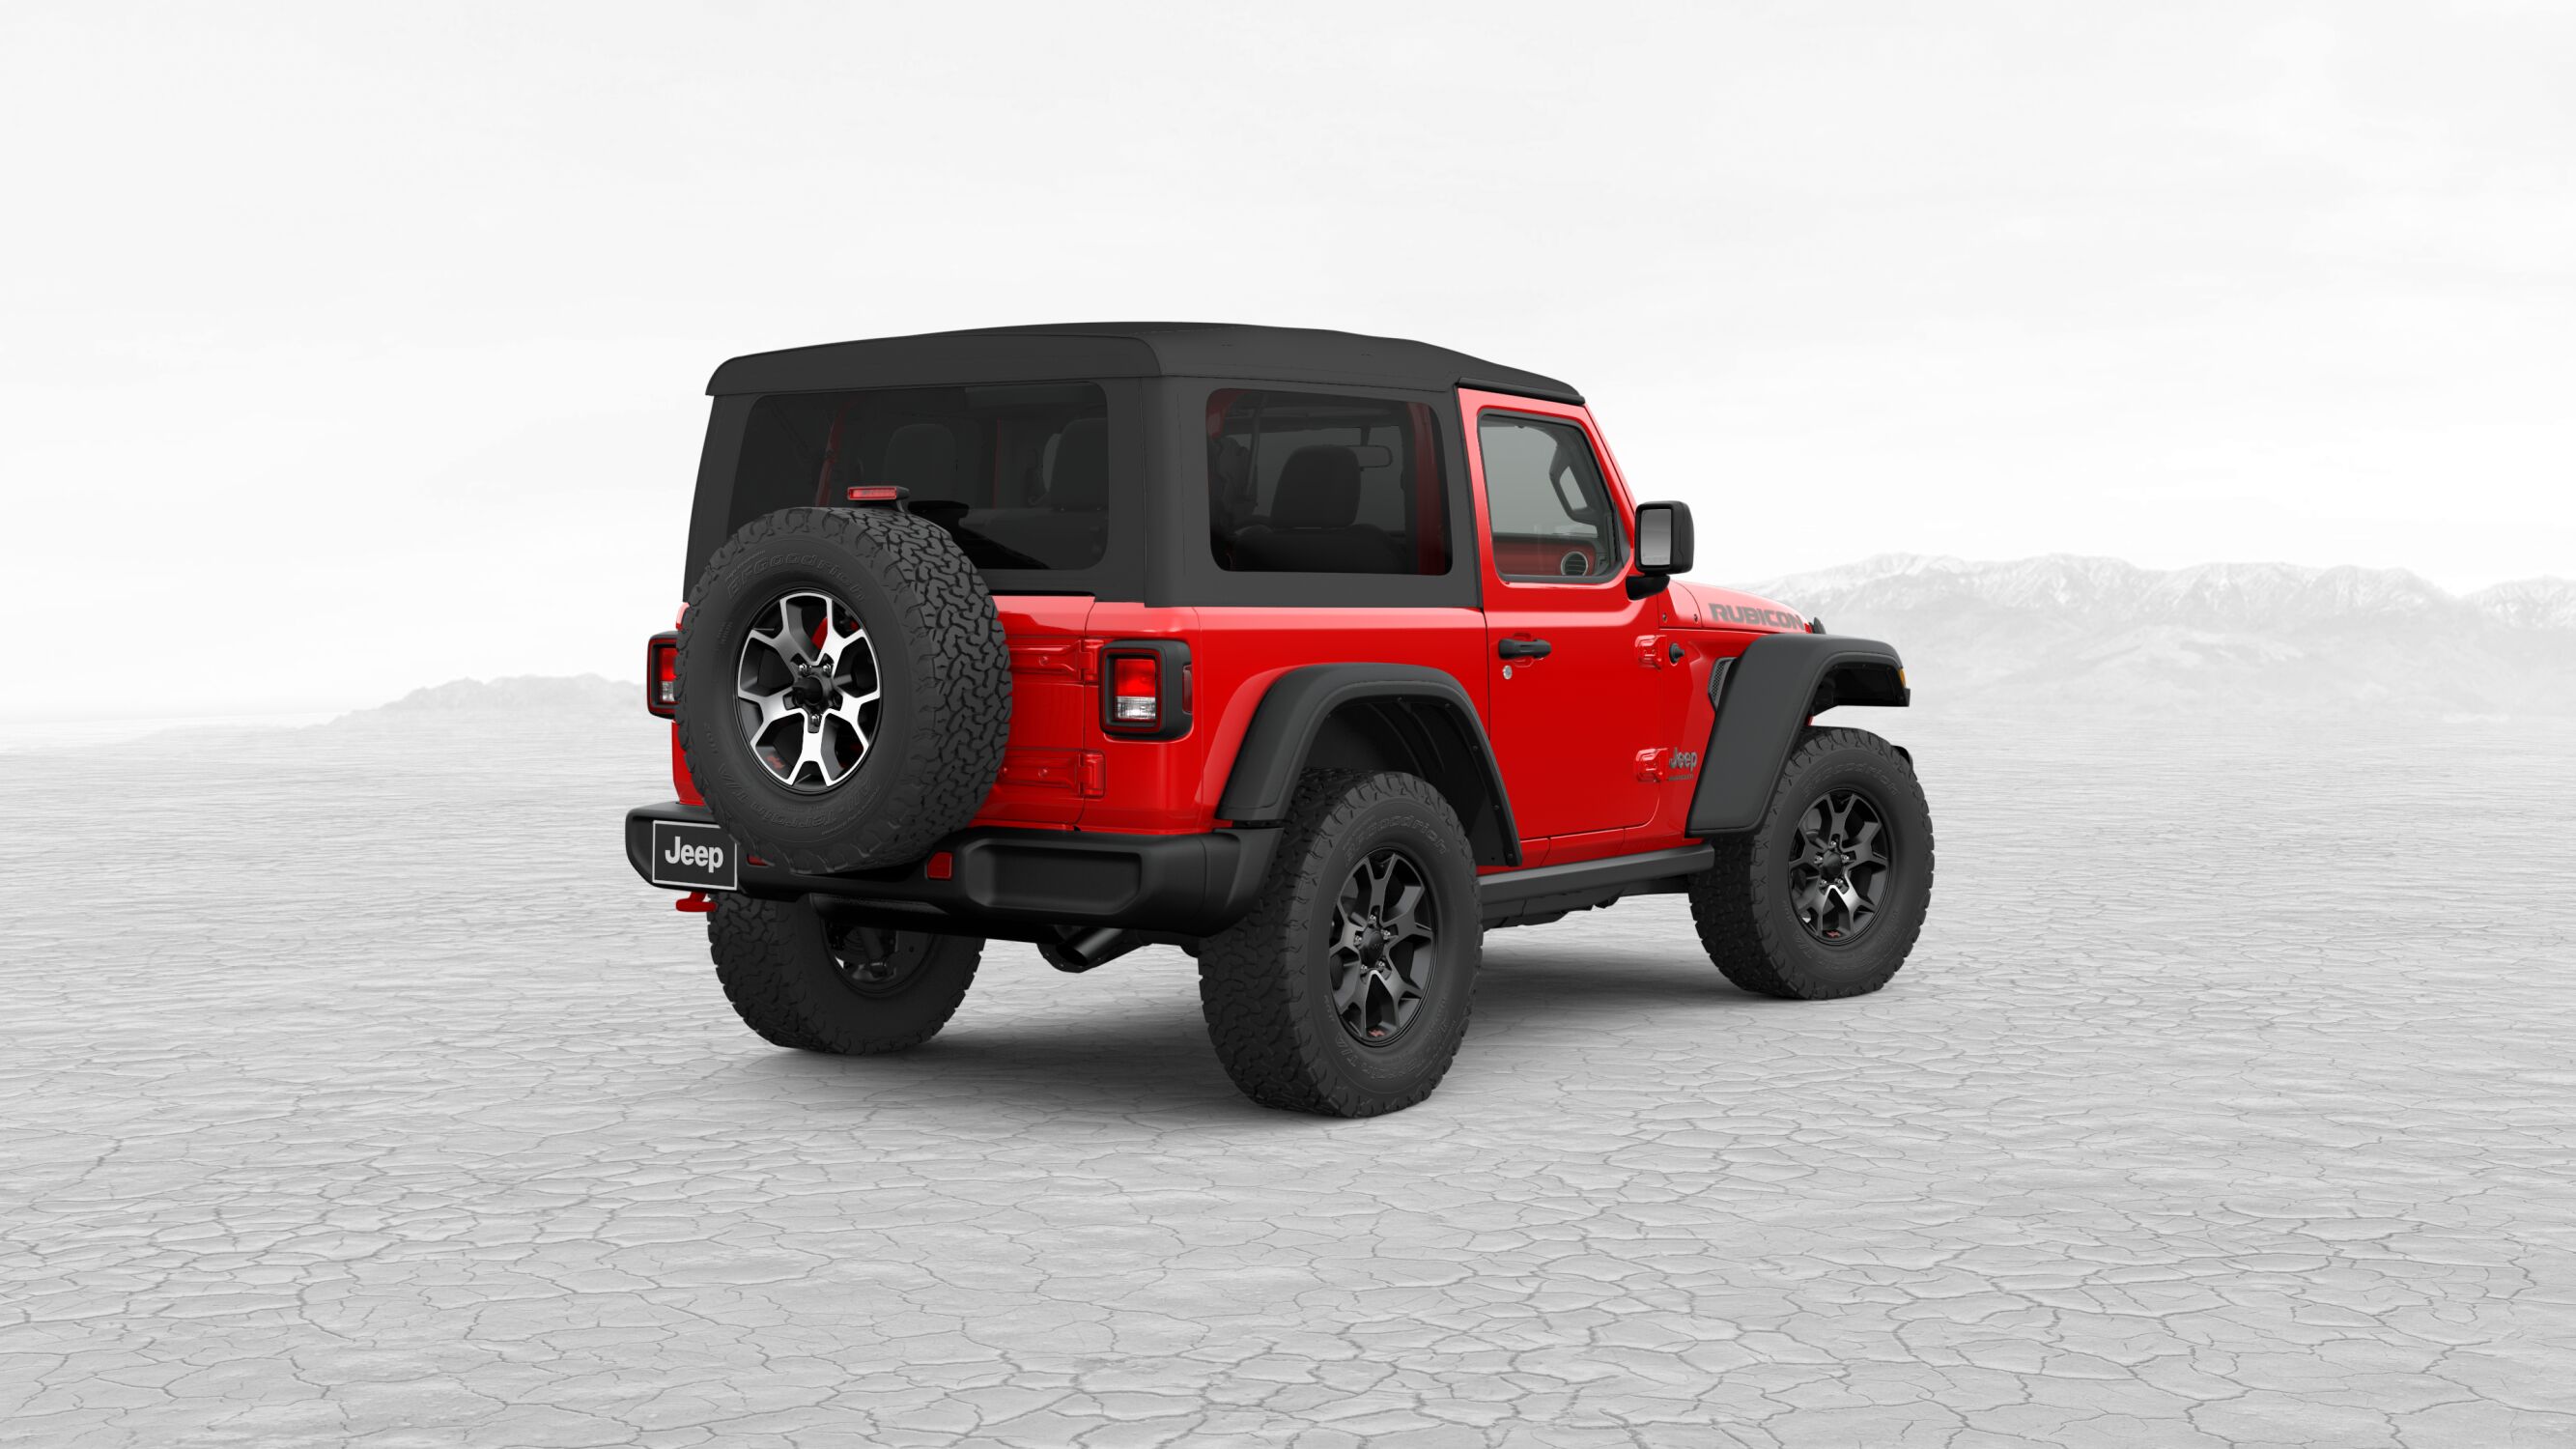 2019 Jeep Wrangler Rubicon Red Exterior Rear View Picture